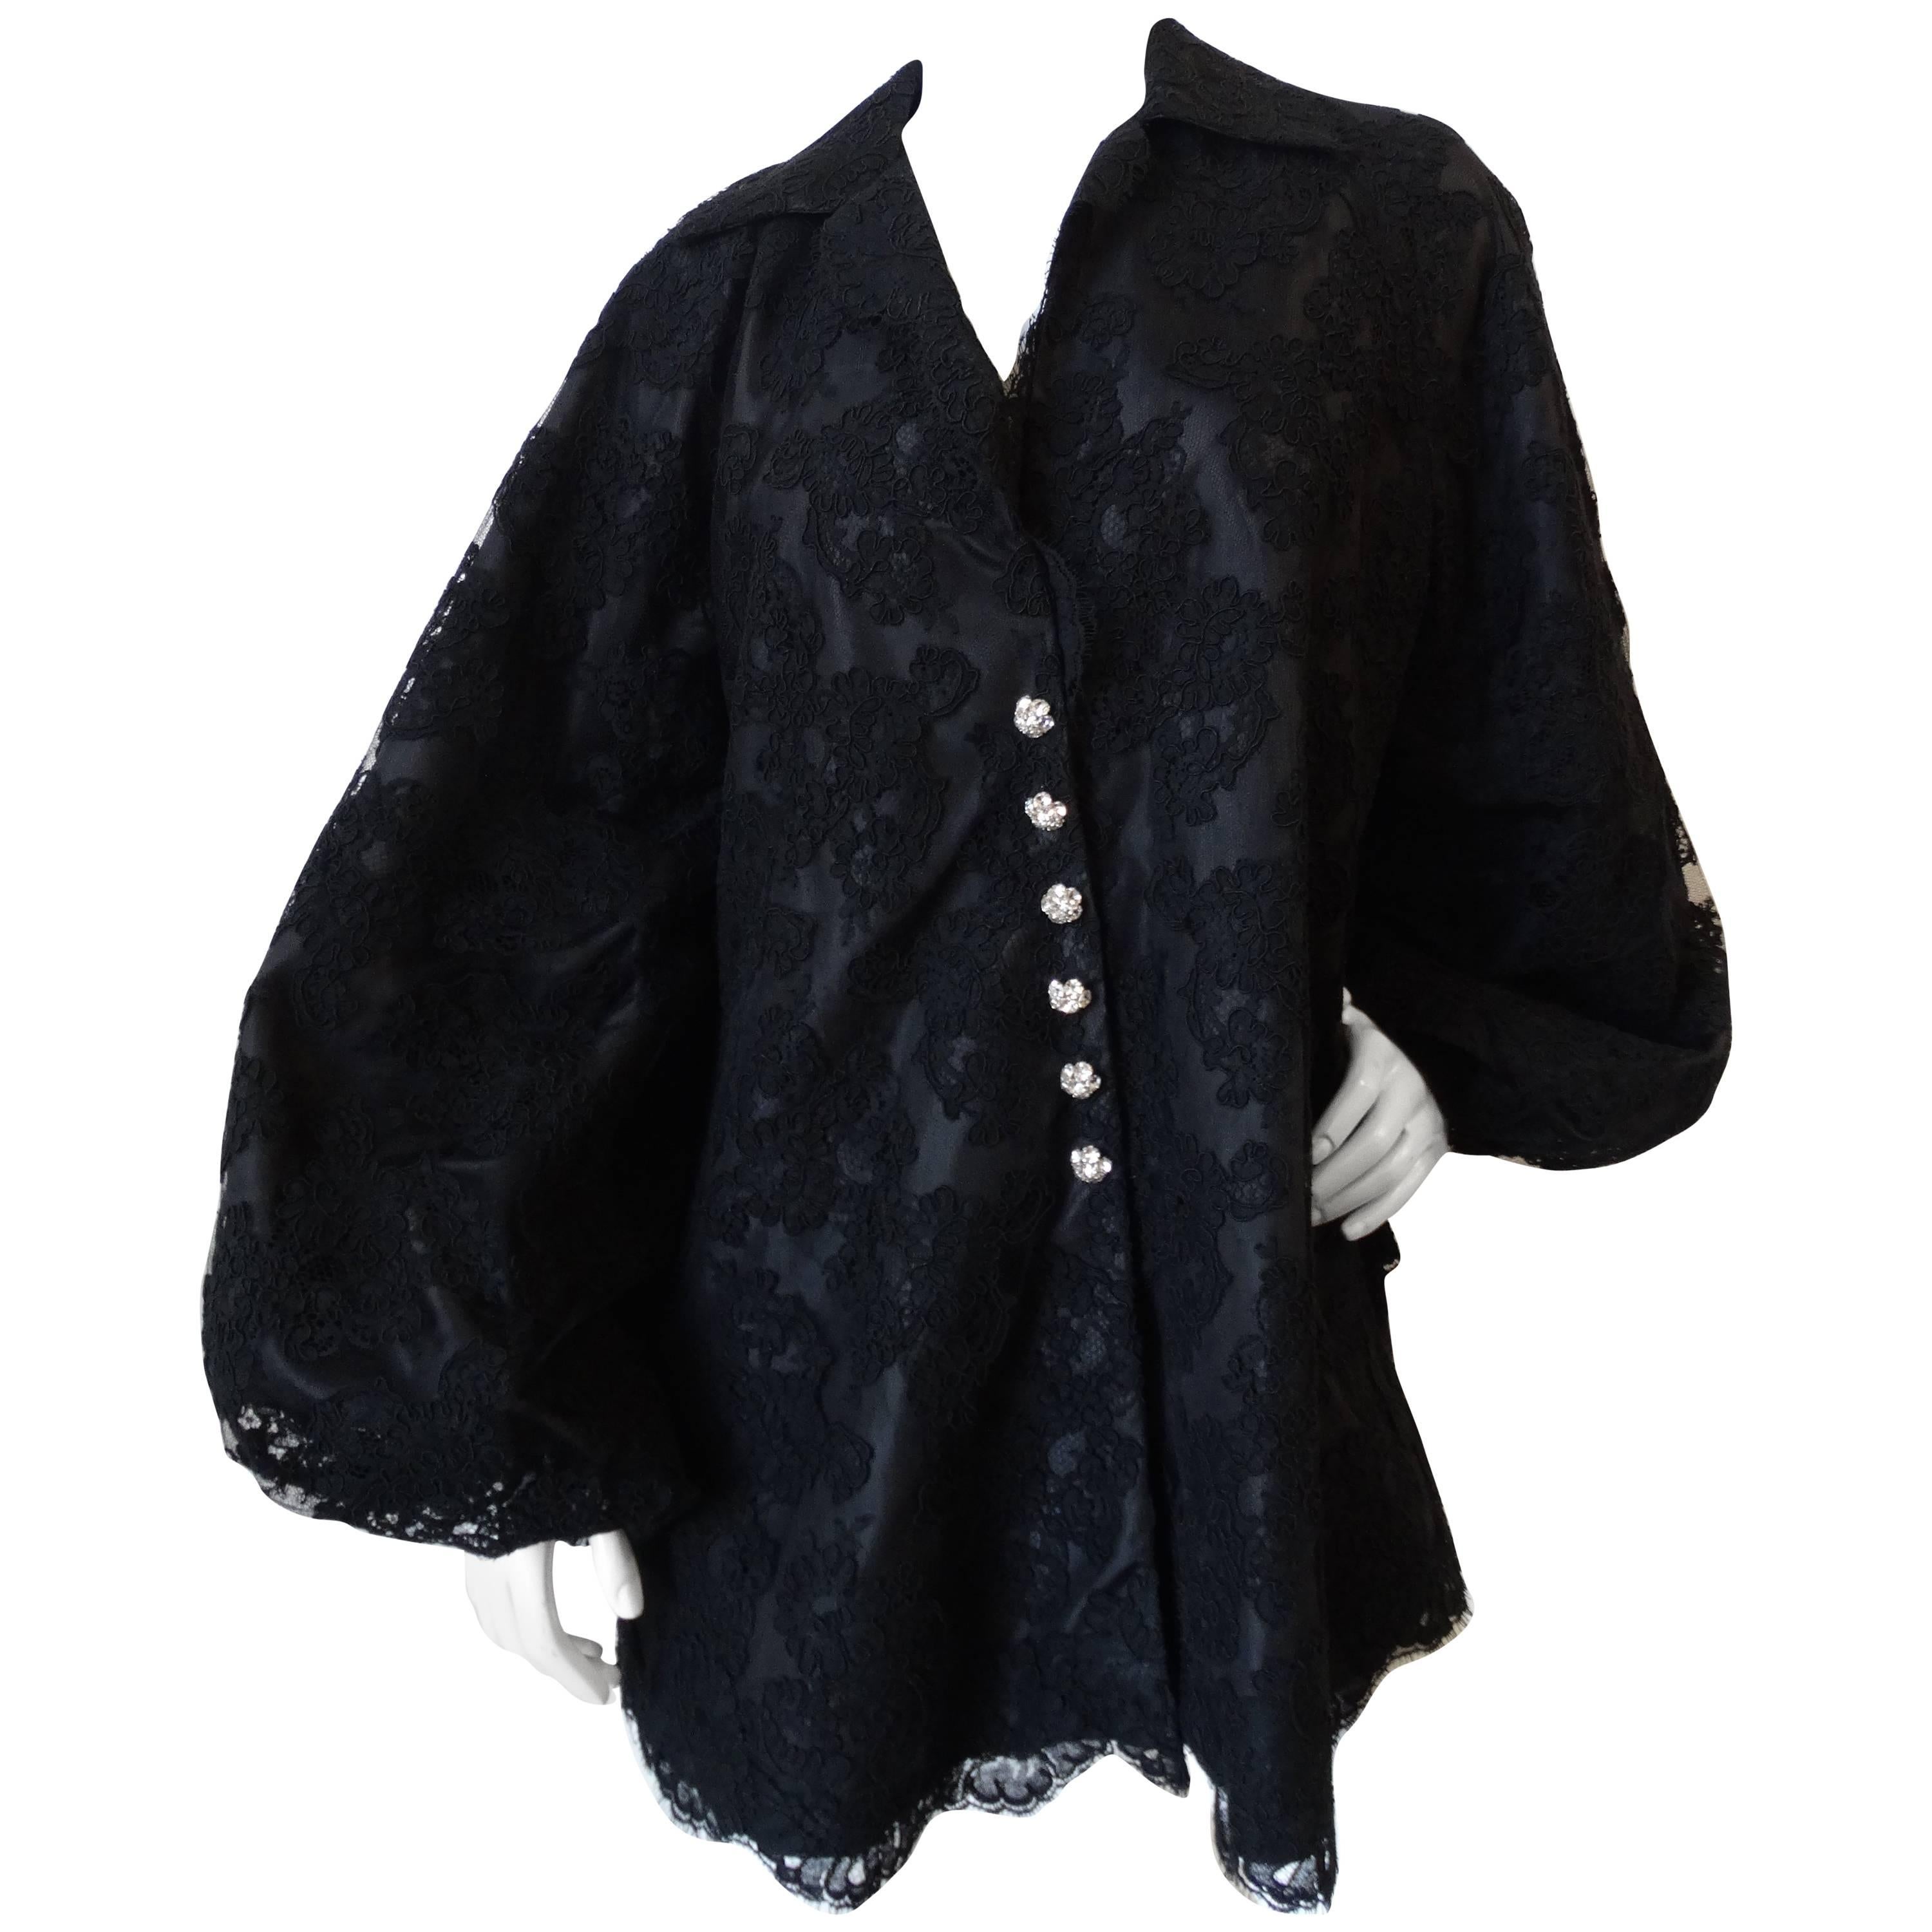 1960s Black Lace Dramatic Bell Sleeve Coat 